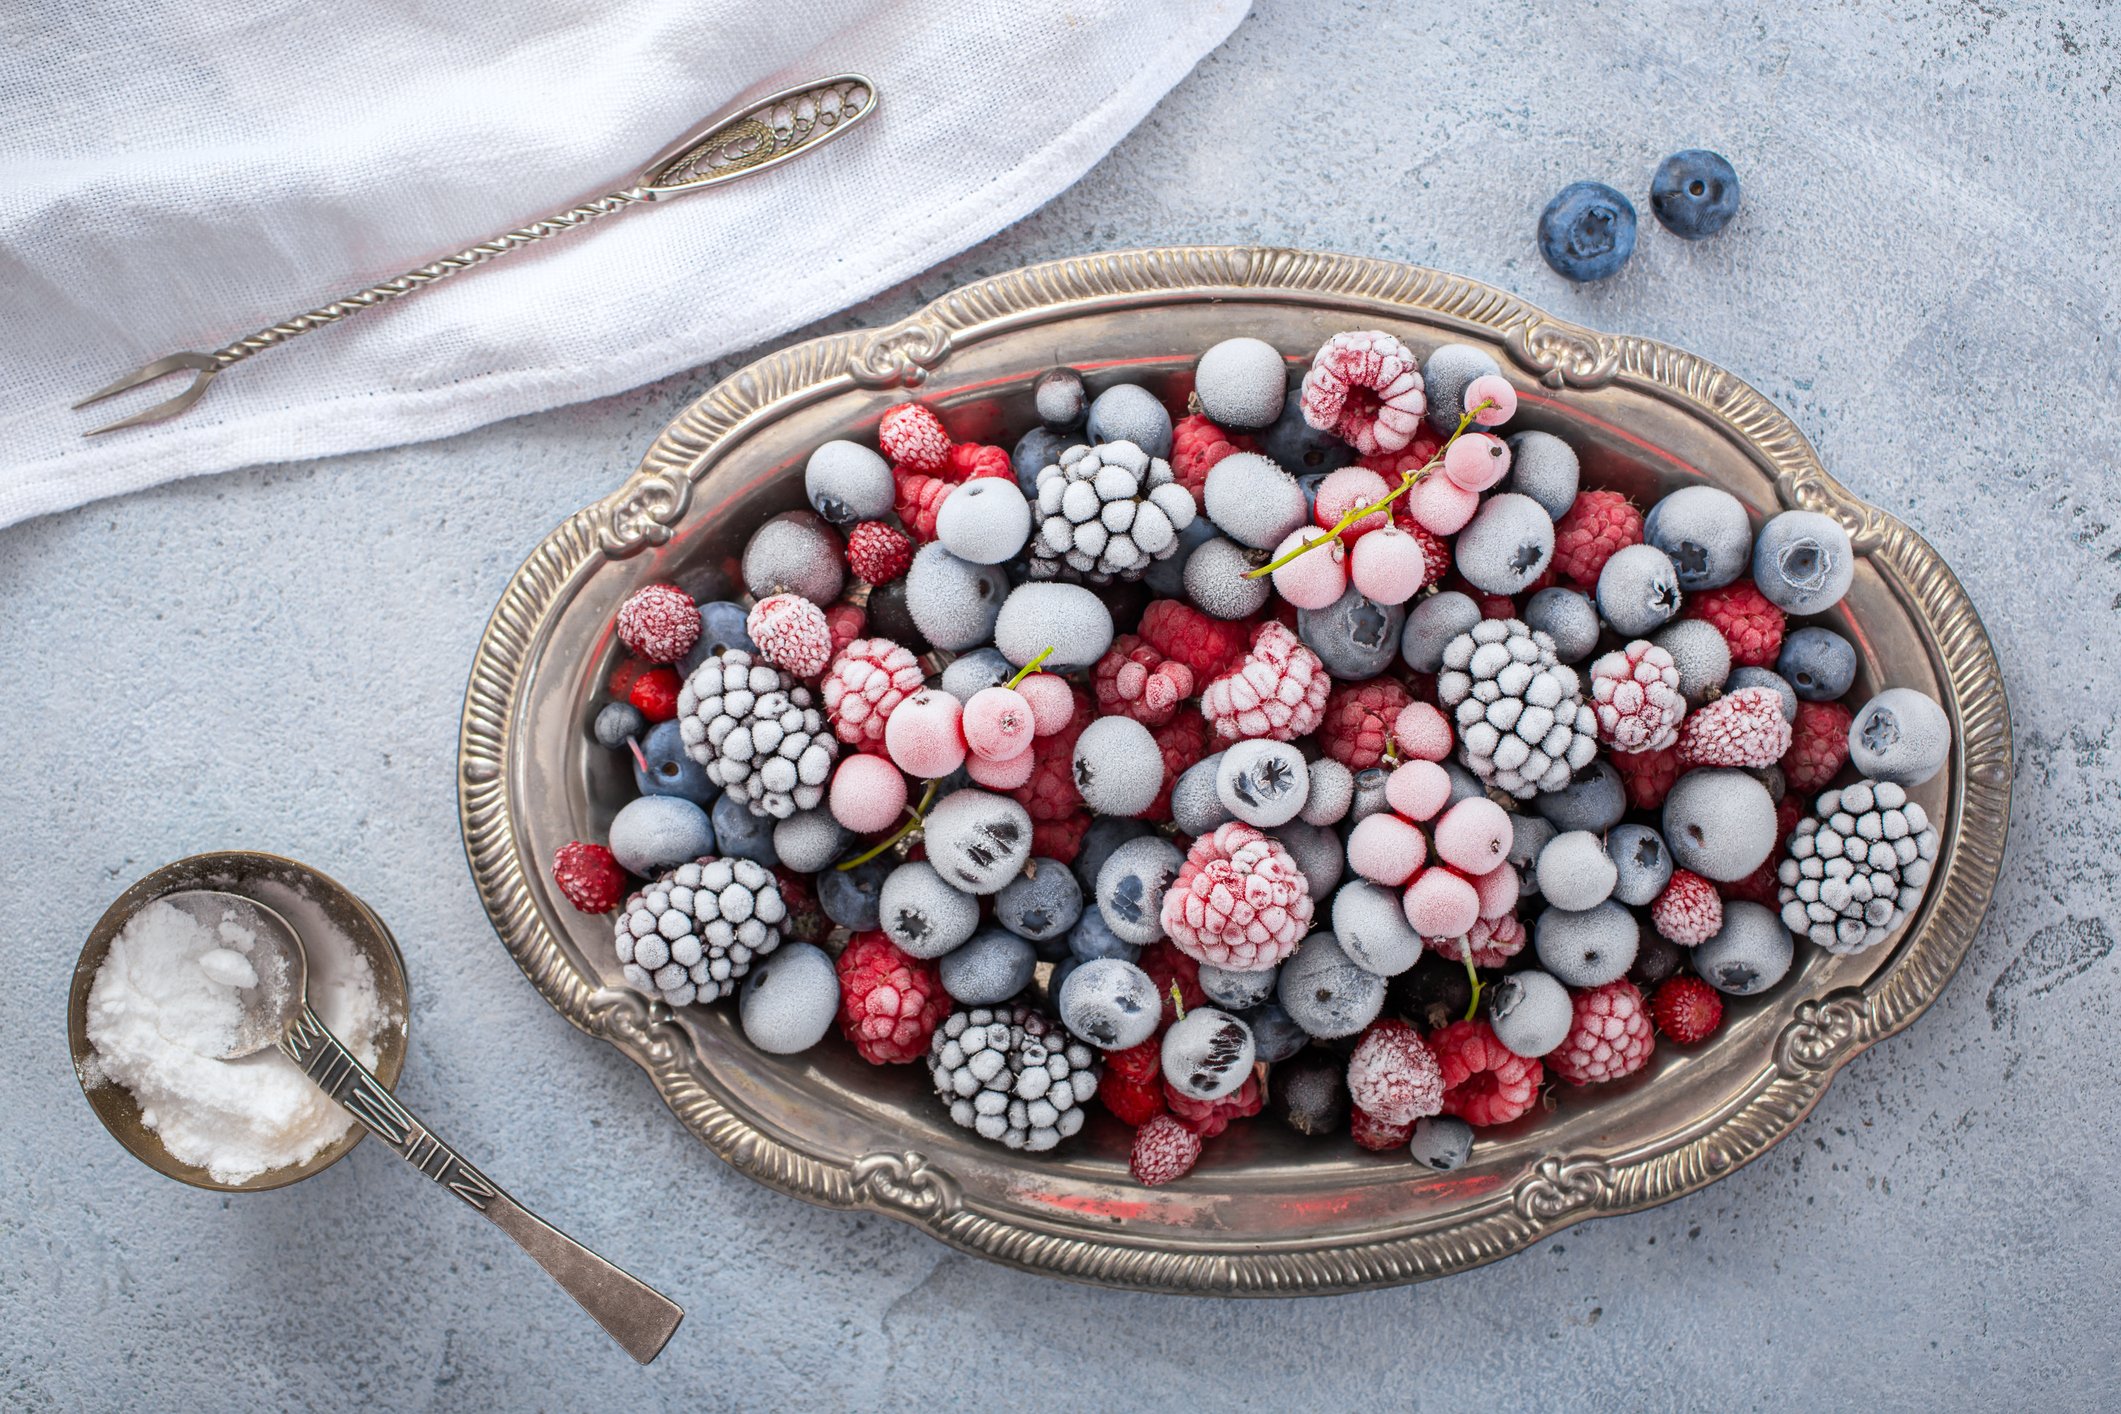 You can try dunking berries in yogurt and freezing them for bite-size snacks. (iStock Photo)